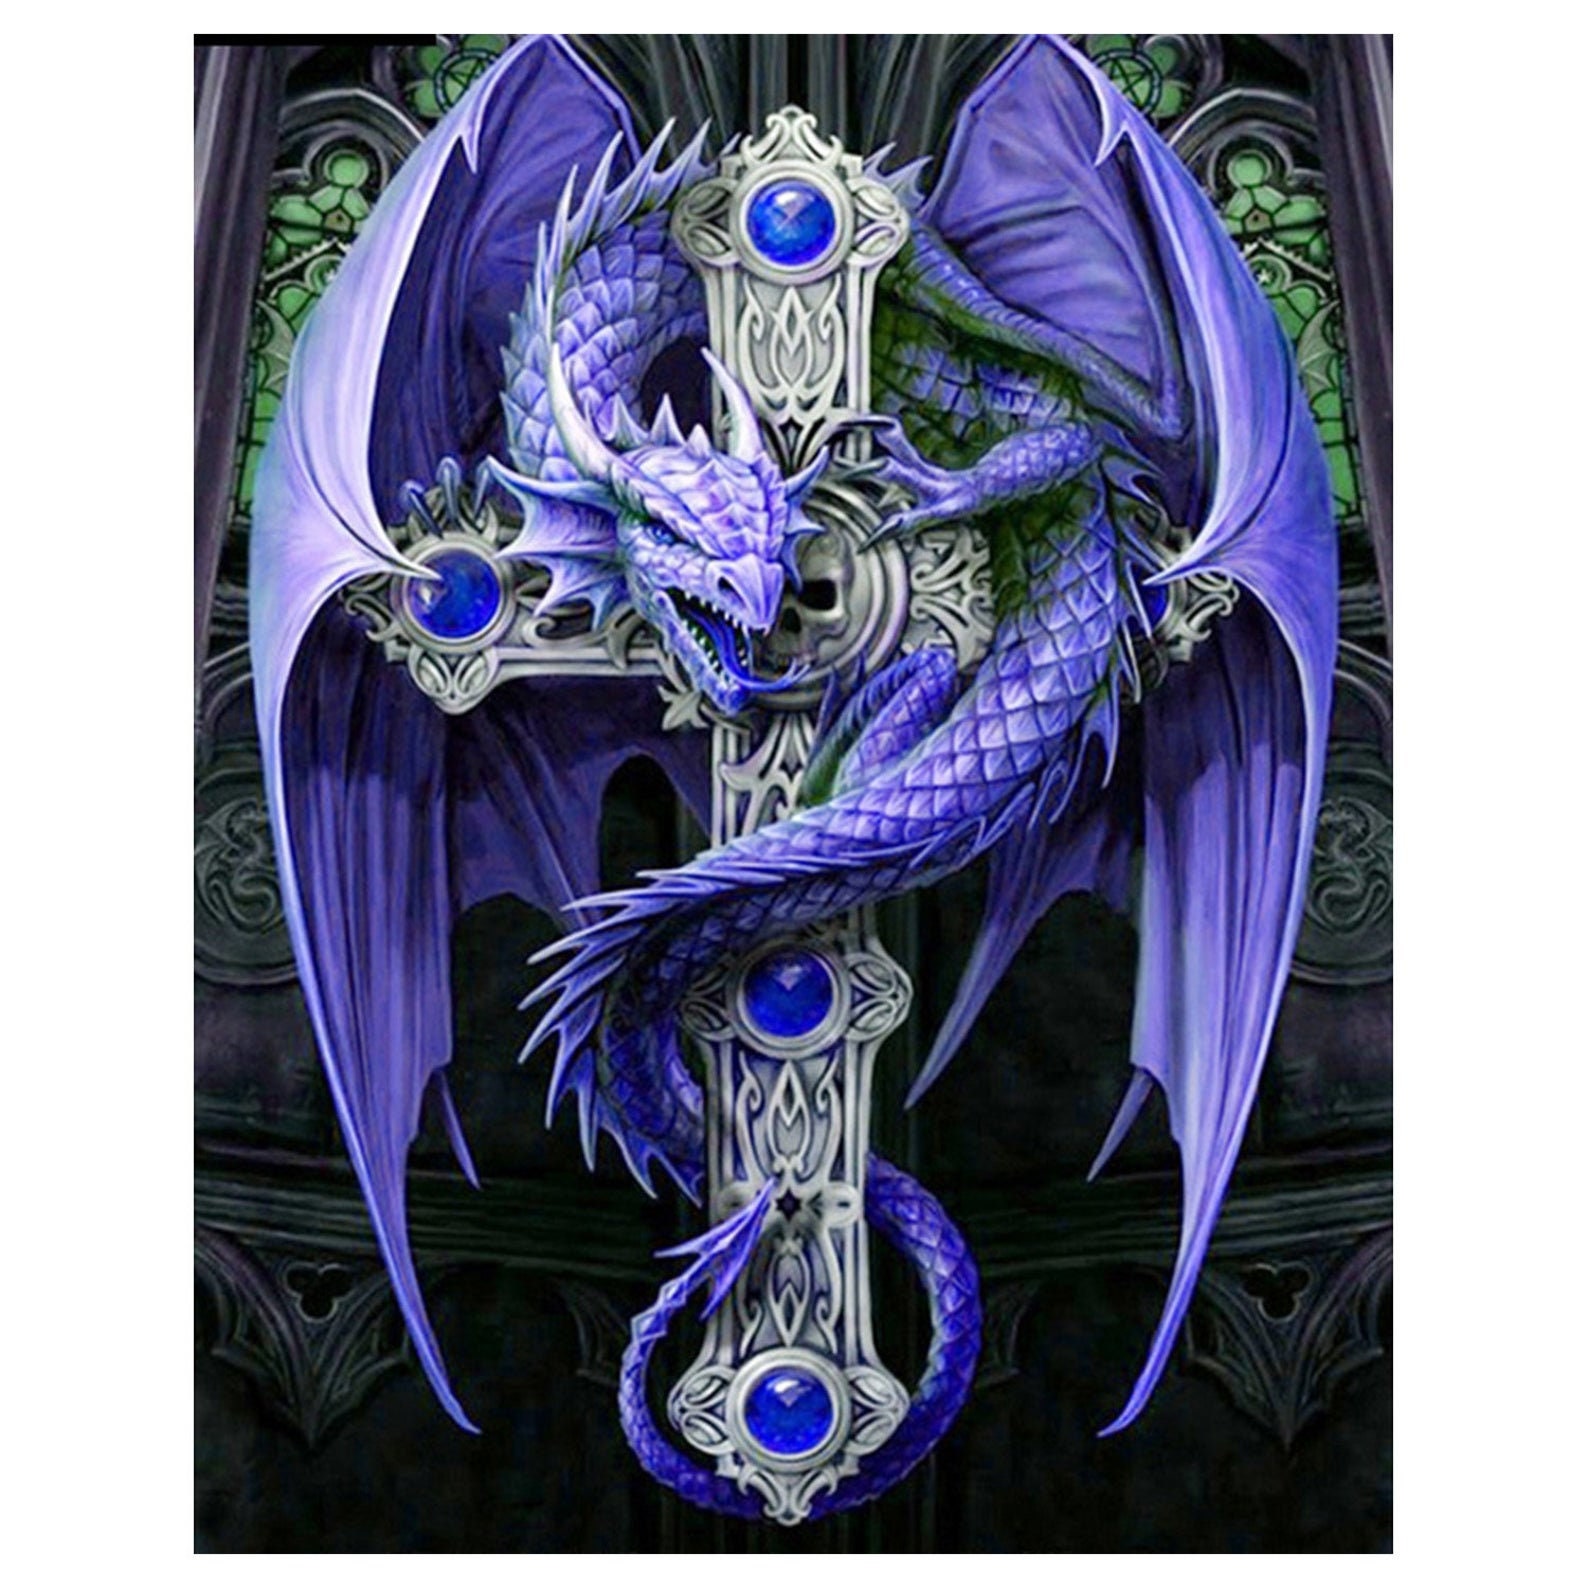  CLAKINLA Dragon Diamond Painting Kits for Adults